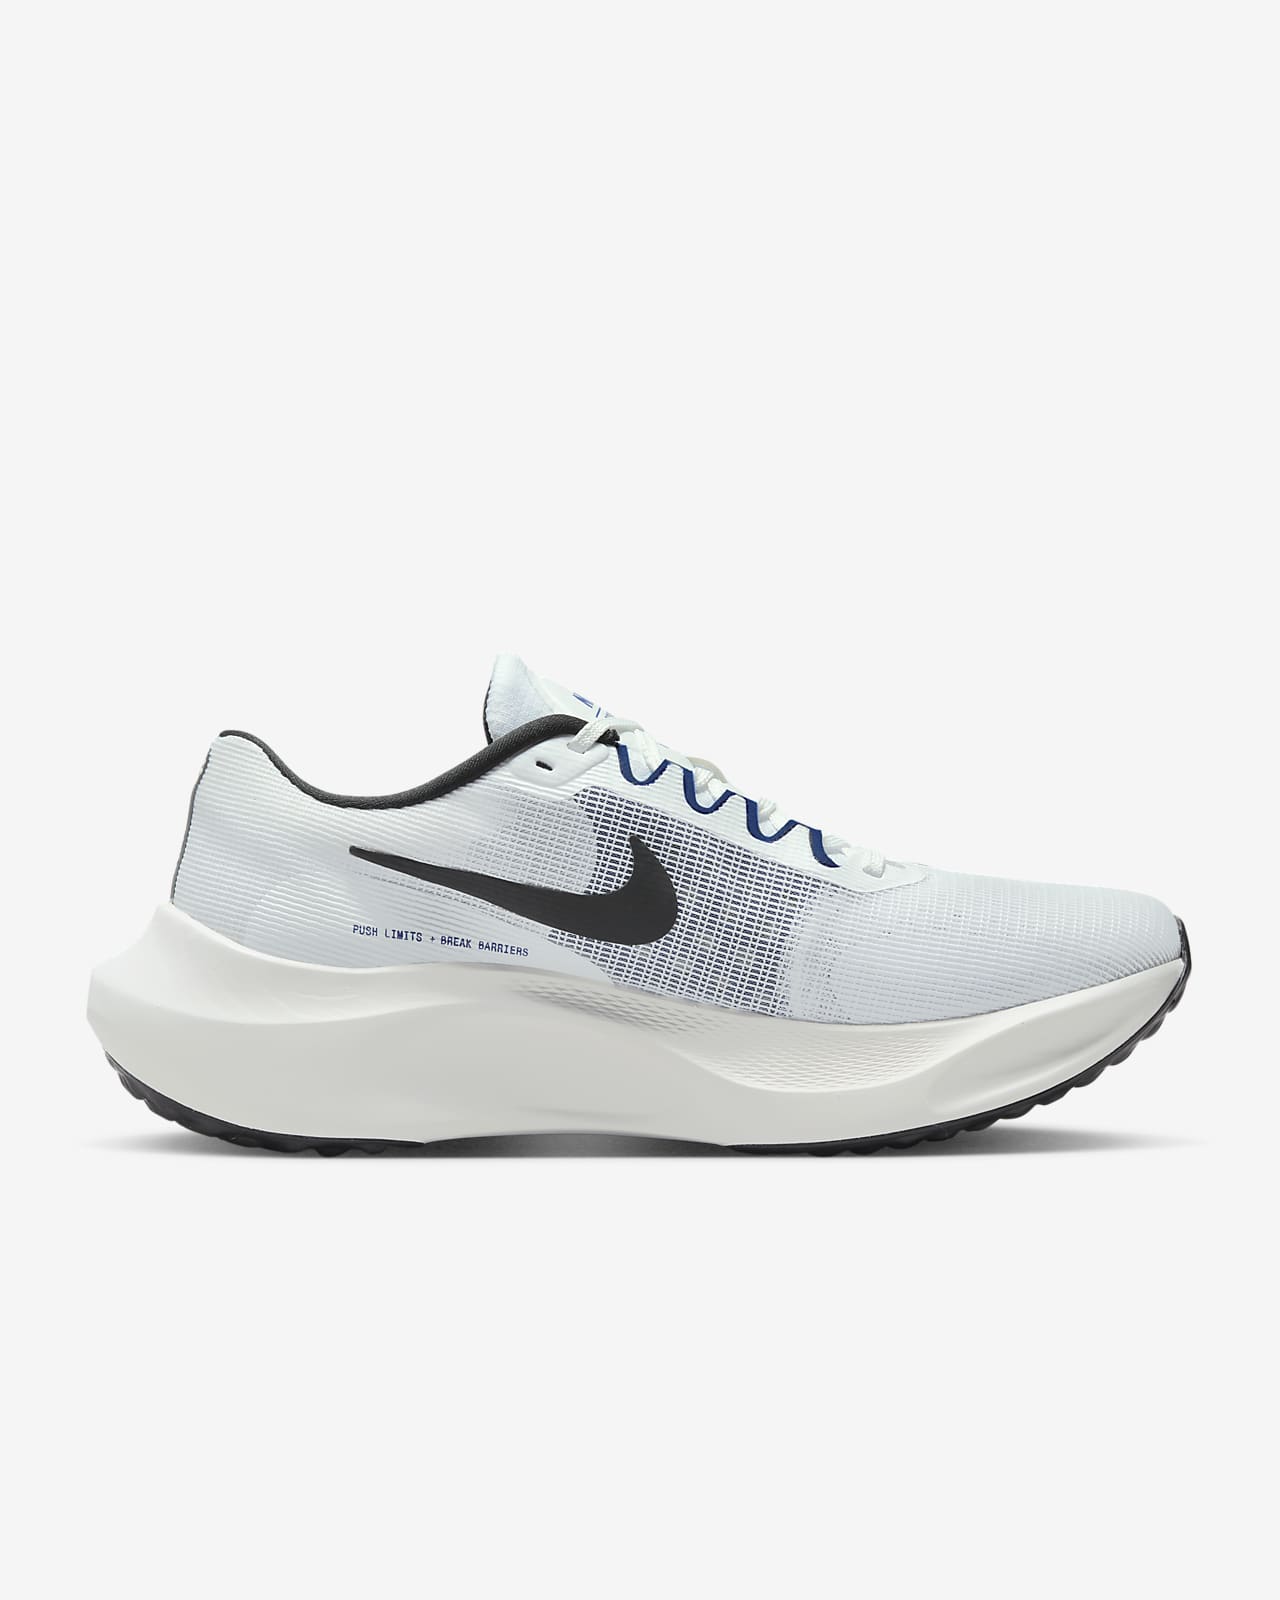 Nike Zoom Fly 5 Men's Running Shoes. Nike CA